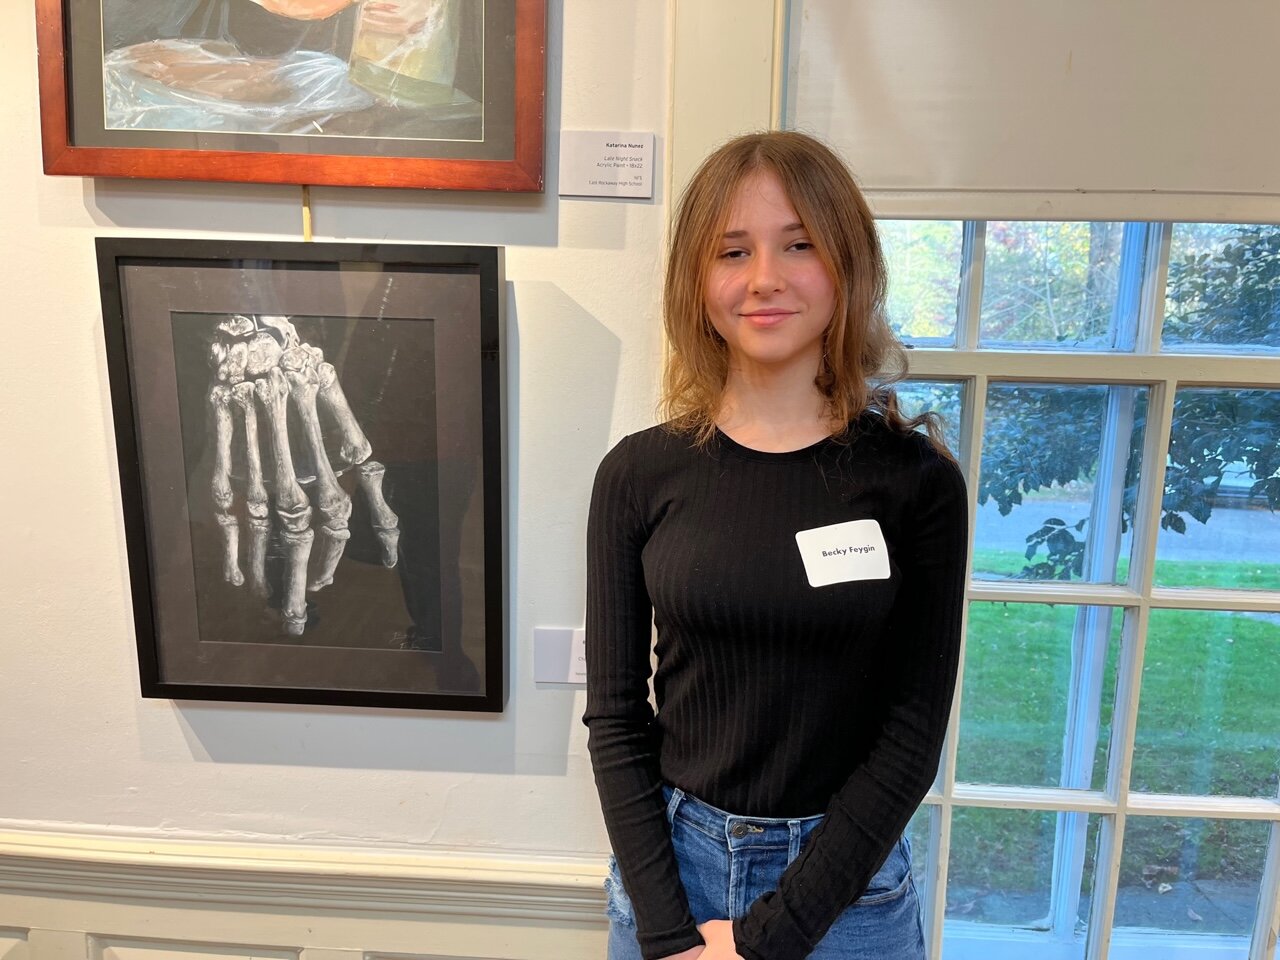 Becky Feygin’s skeleton hand drawing was displayed at the Art Guild, in Manhasset, along with the work of 74 other Nassau County high school students.